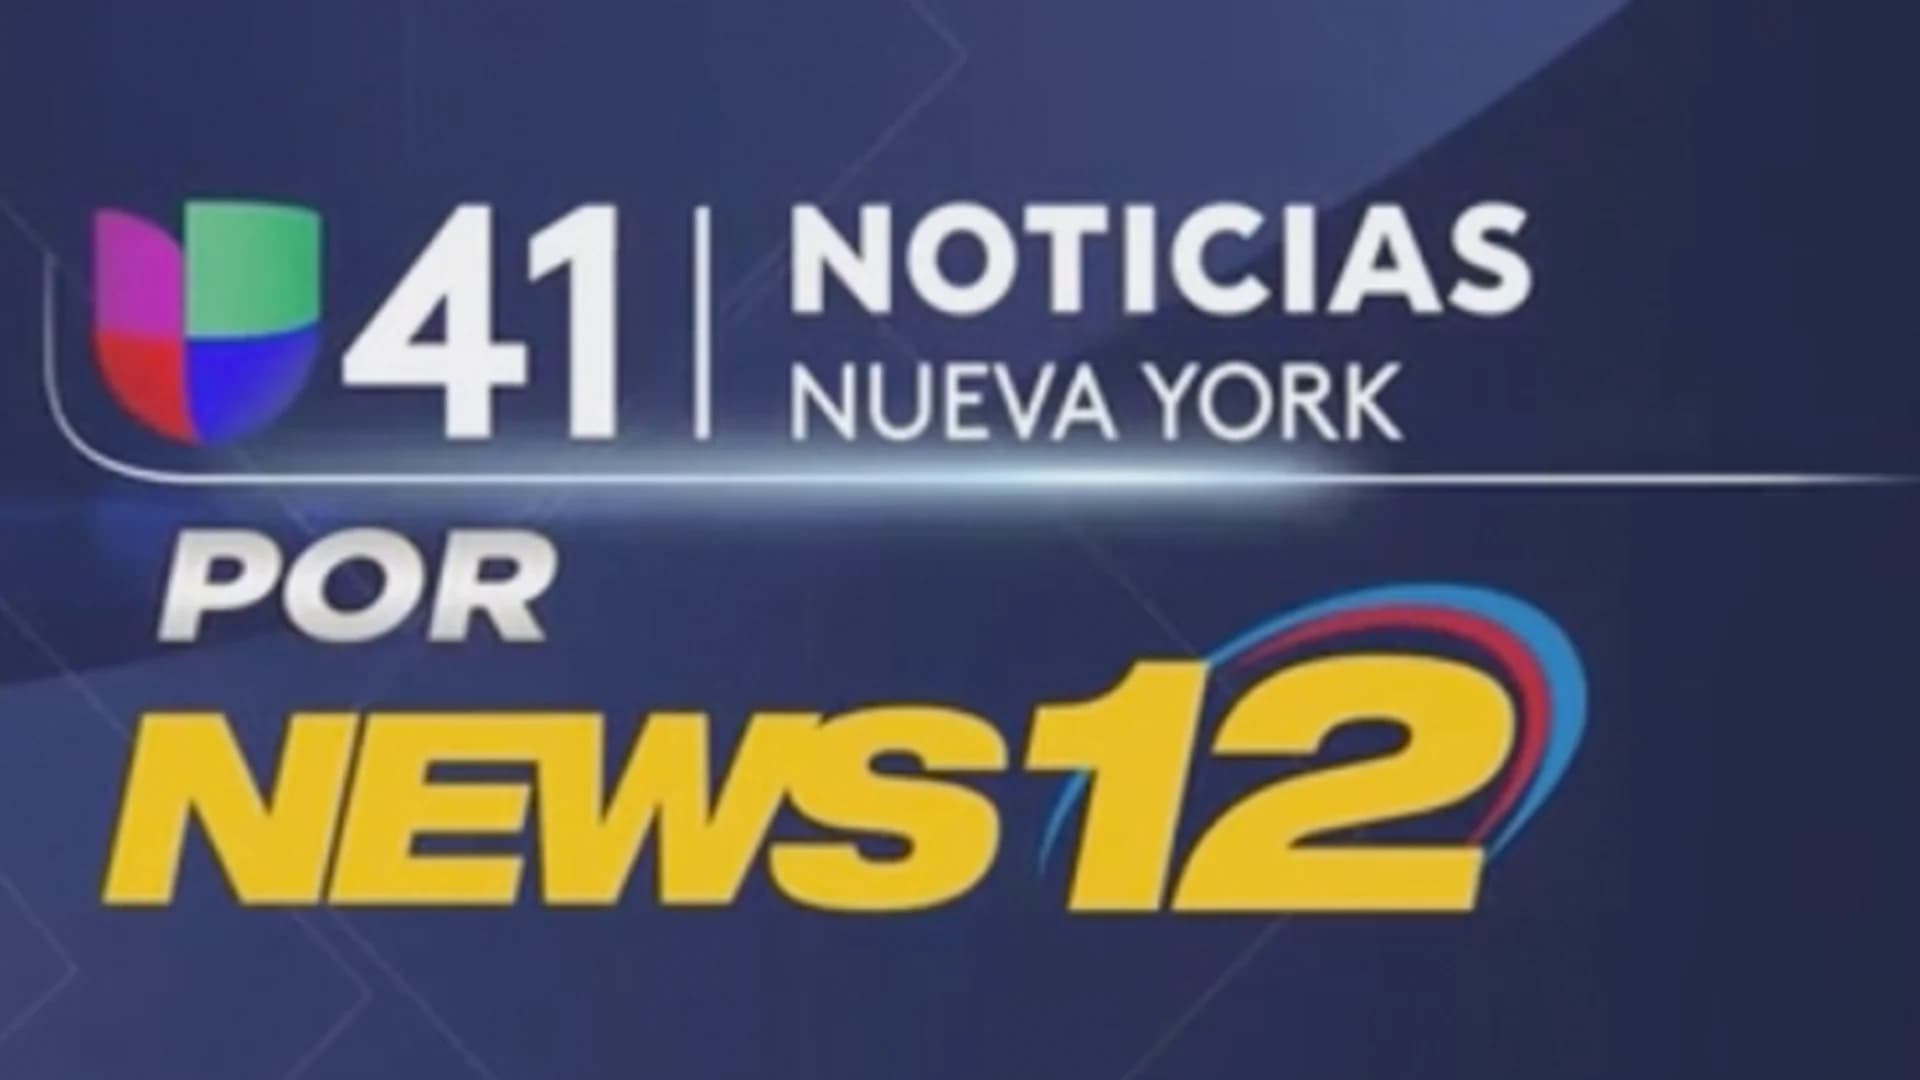 Univision New York, News 12 partner to bring Spanish-language news updates to viewers throughout the tri-state area